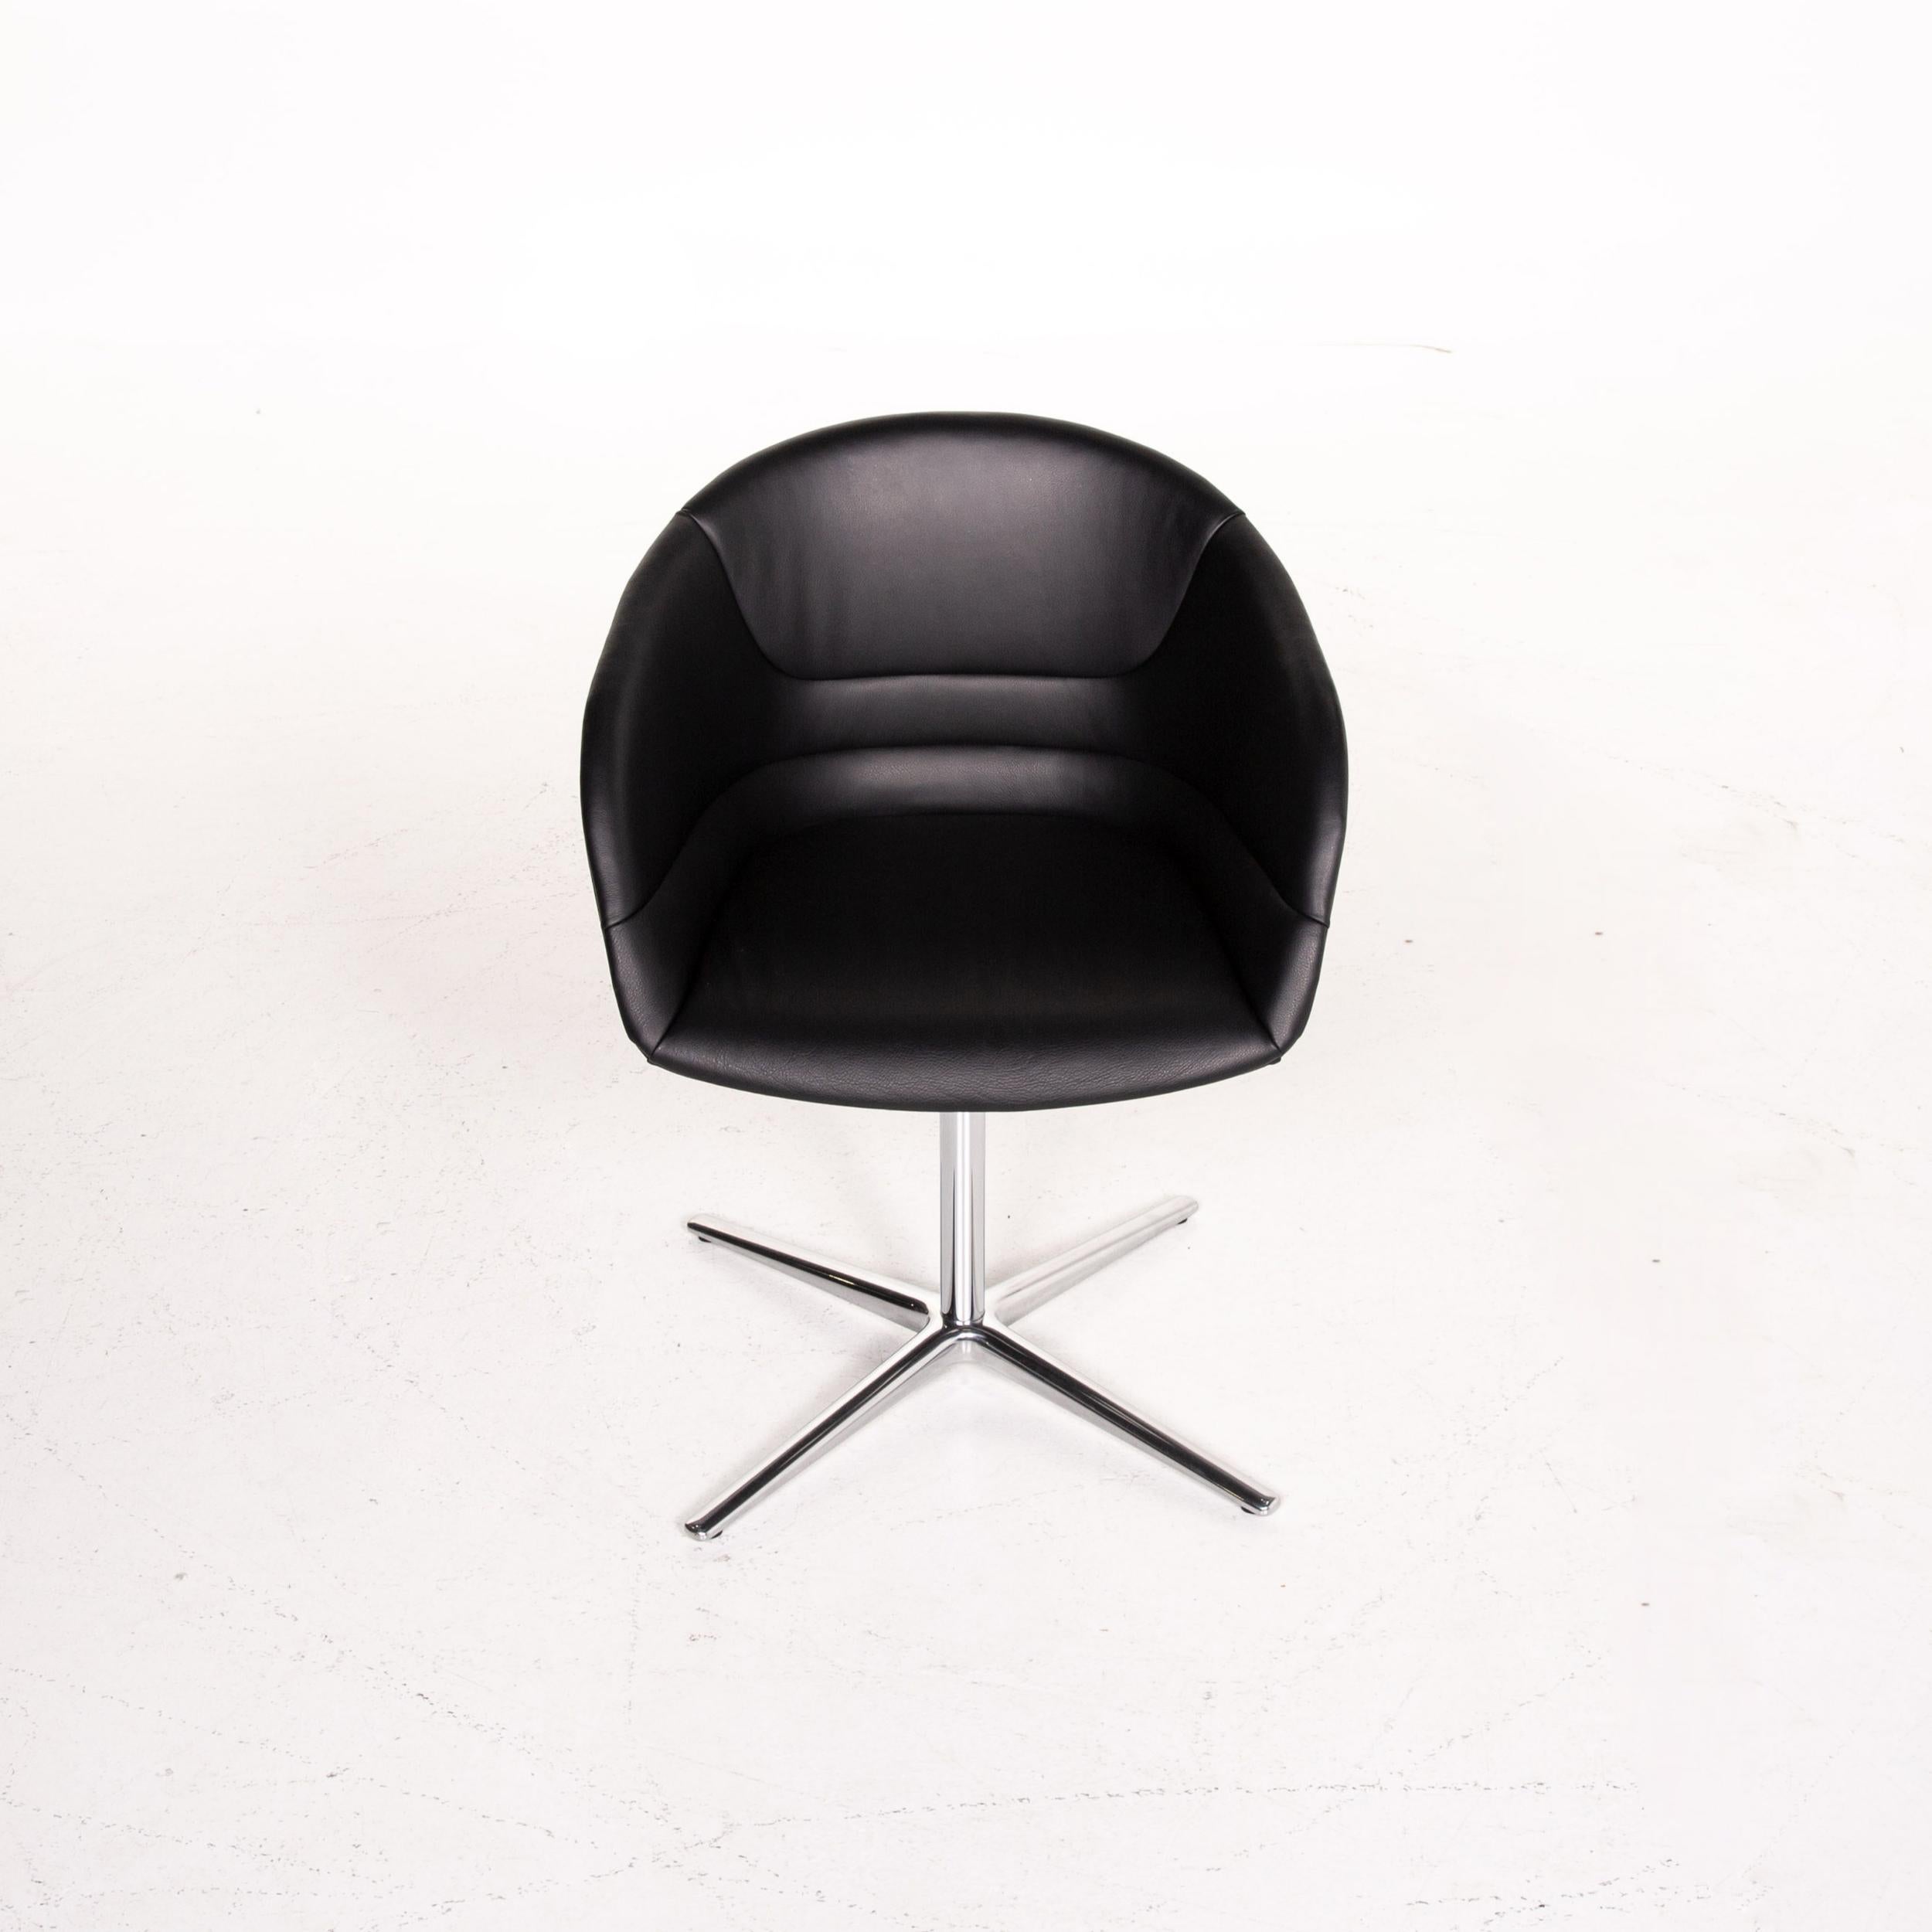 Walter Knoll Kyo Leather Armchair Black Chair Swivel For Sale 1